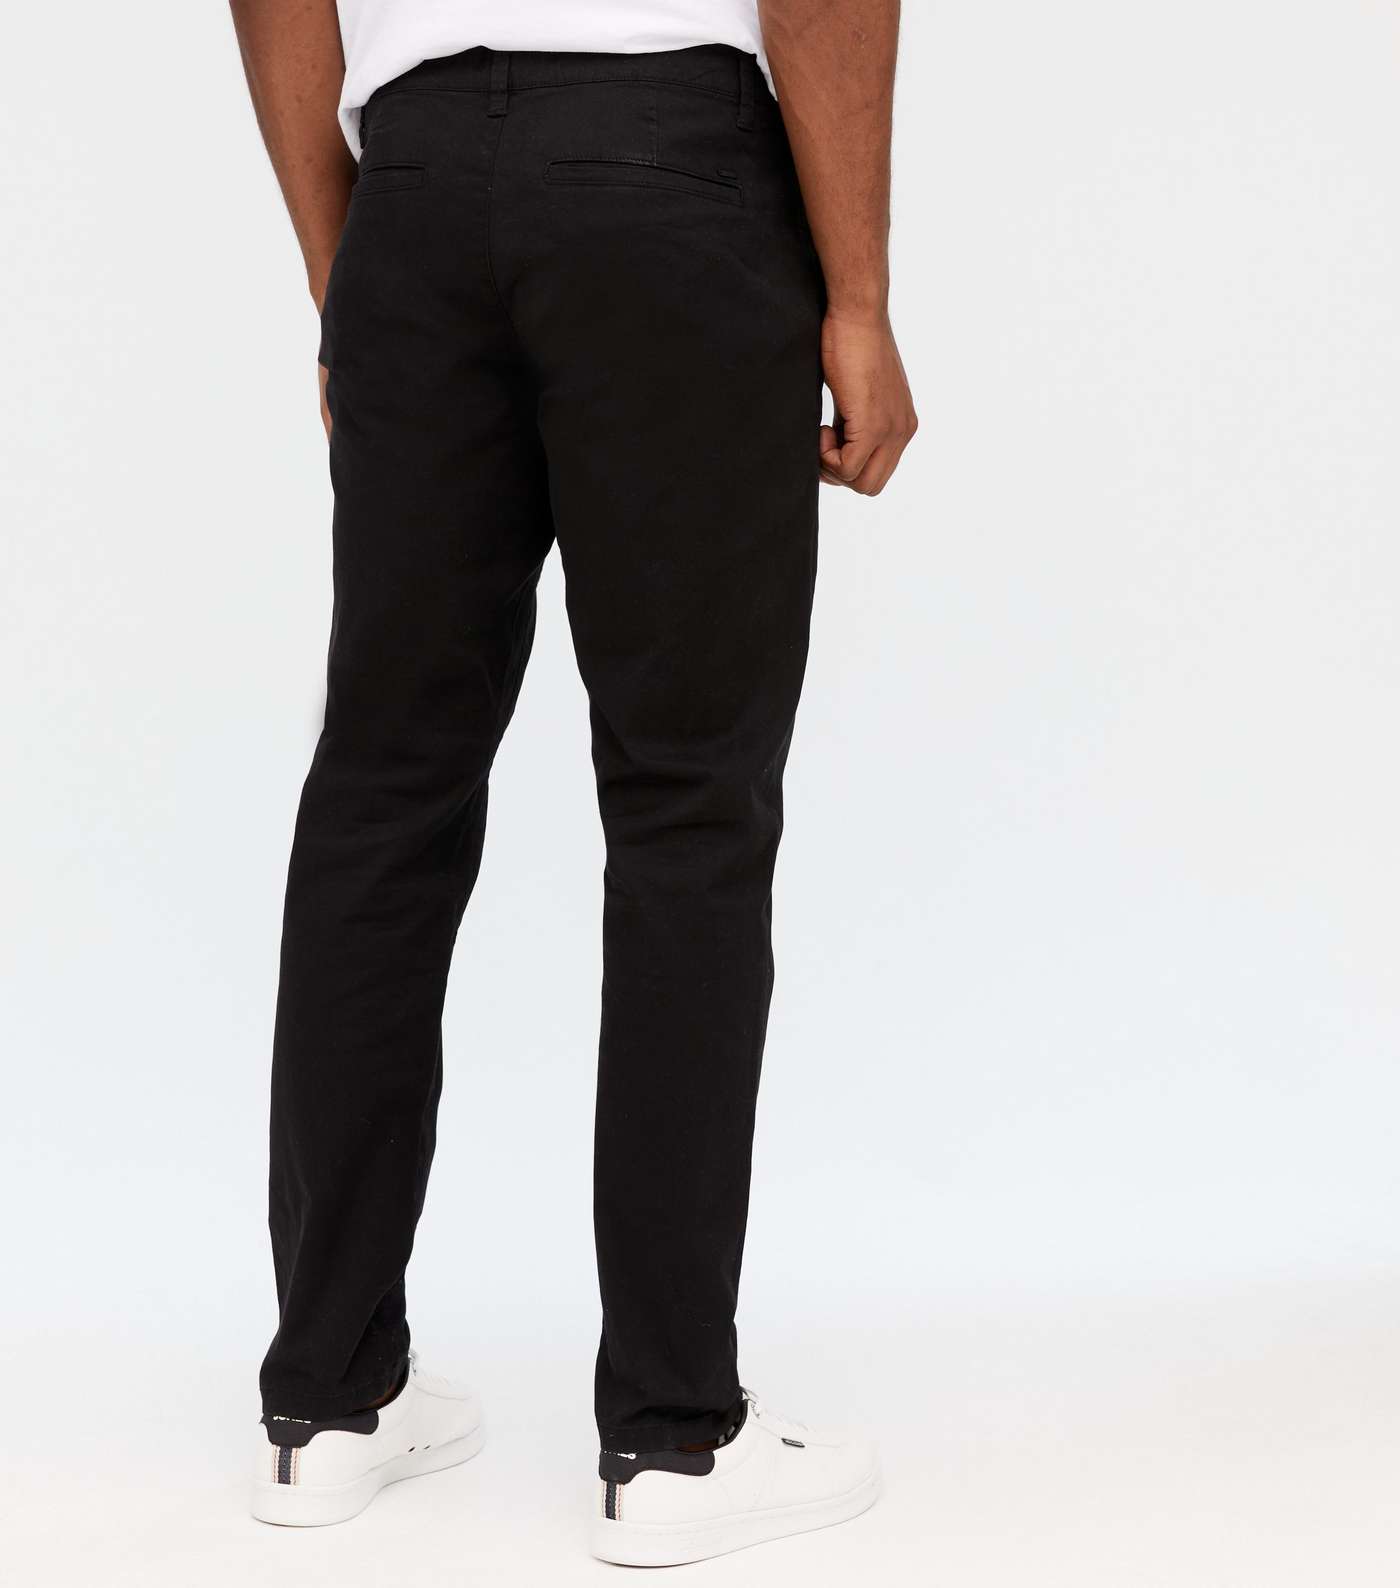 Only & Sons Black Skinny Fit Chinos Image 4